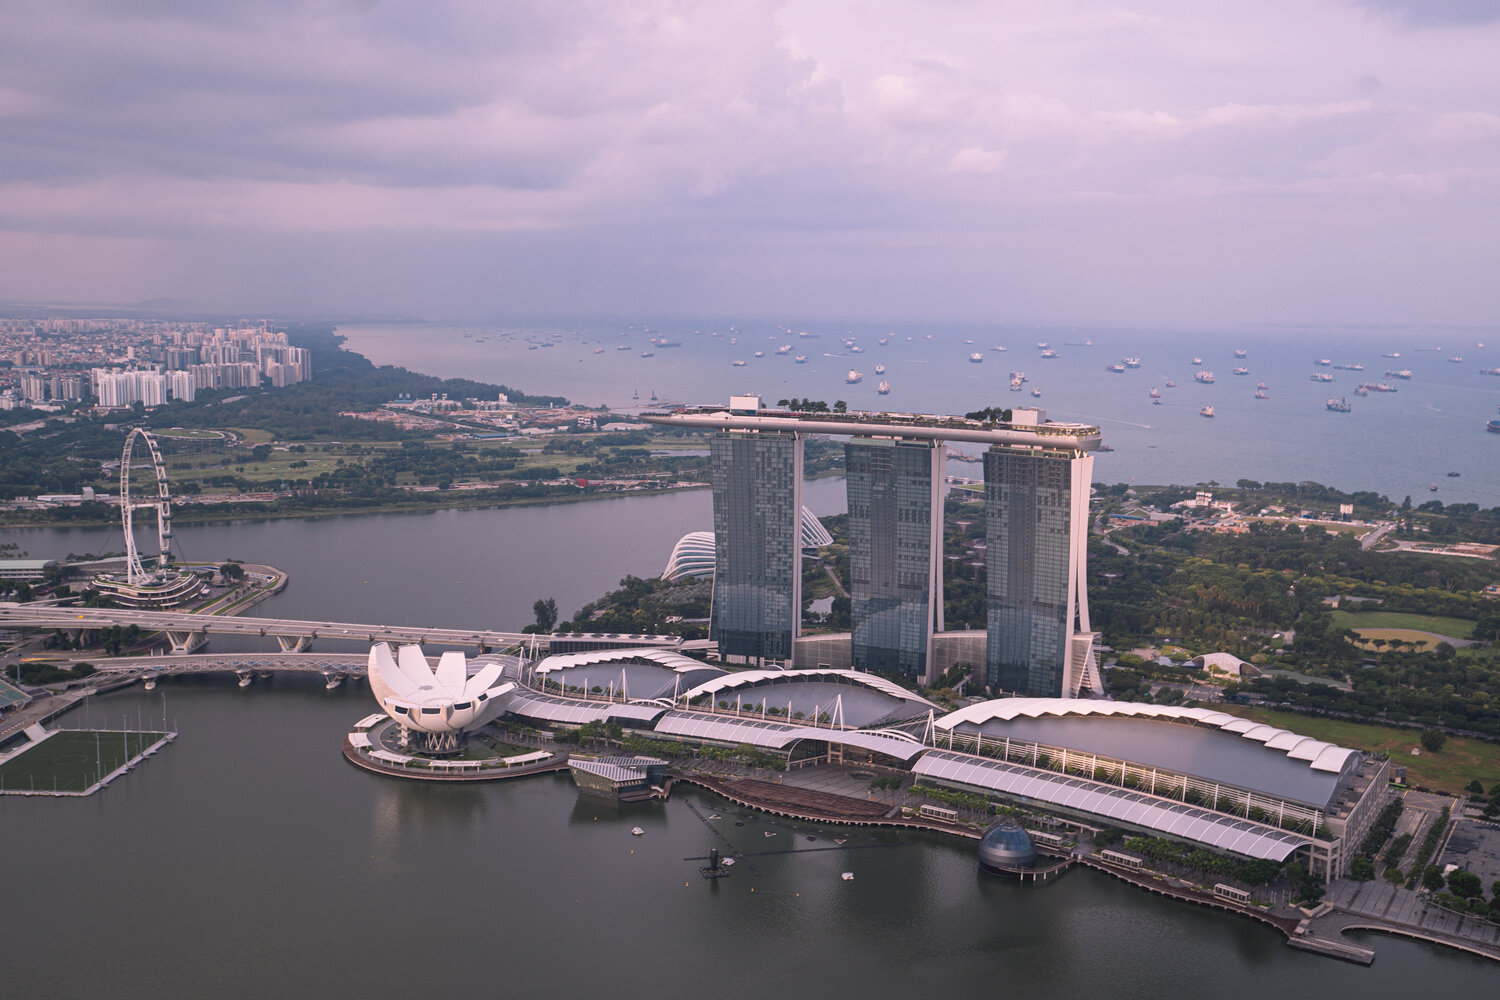 The Marina Bay with the famous Marina Bay Sands Hotel, the Singapore Flyer and the ArtScience Museum